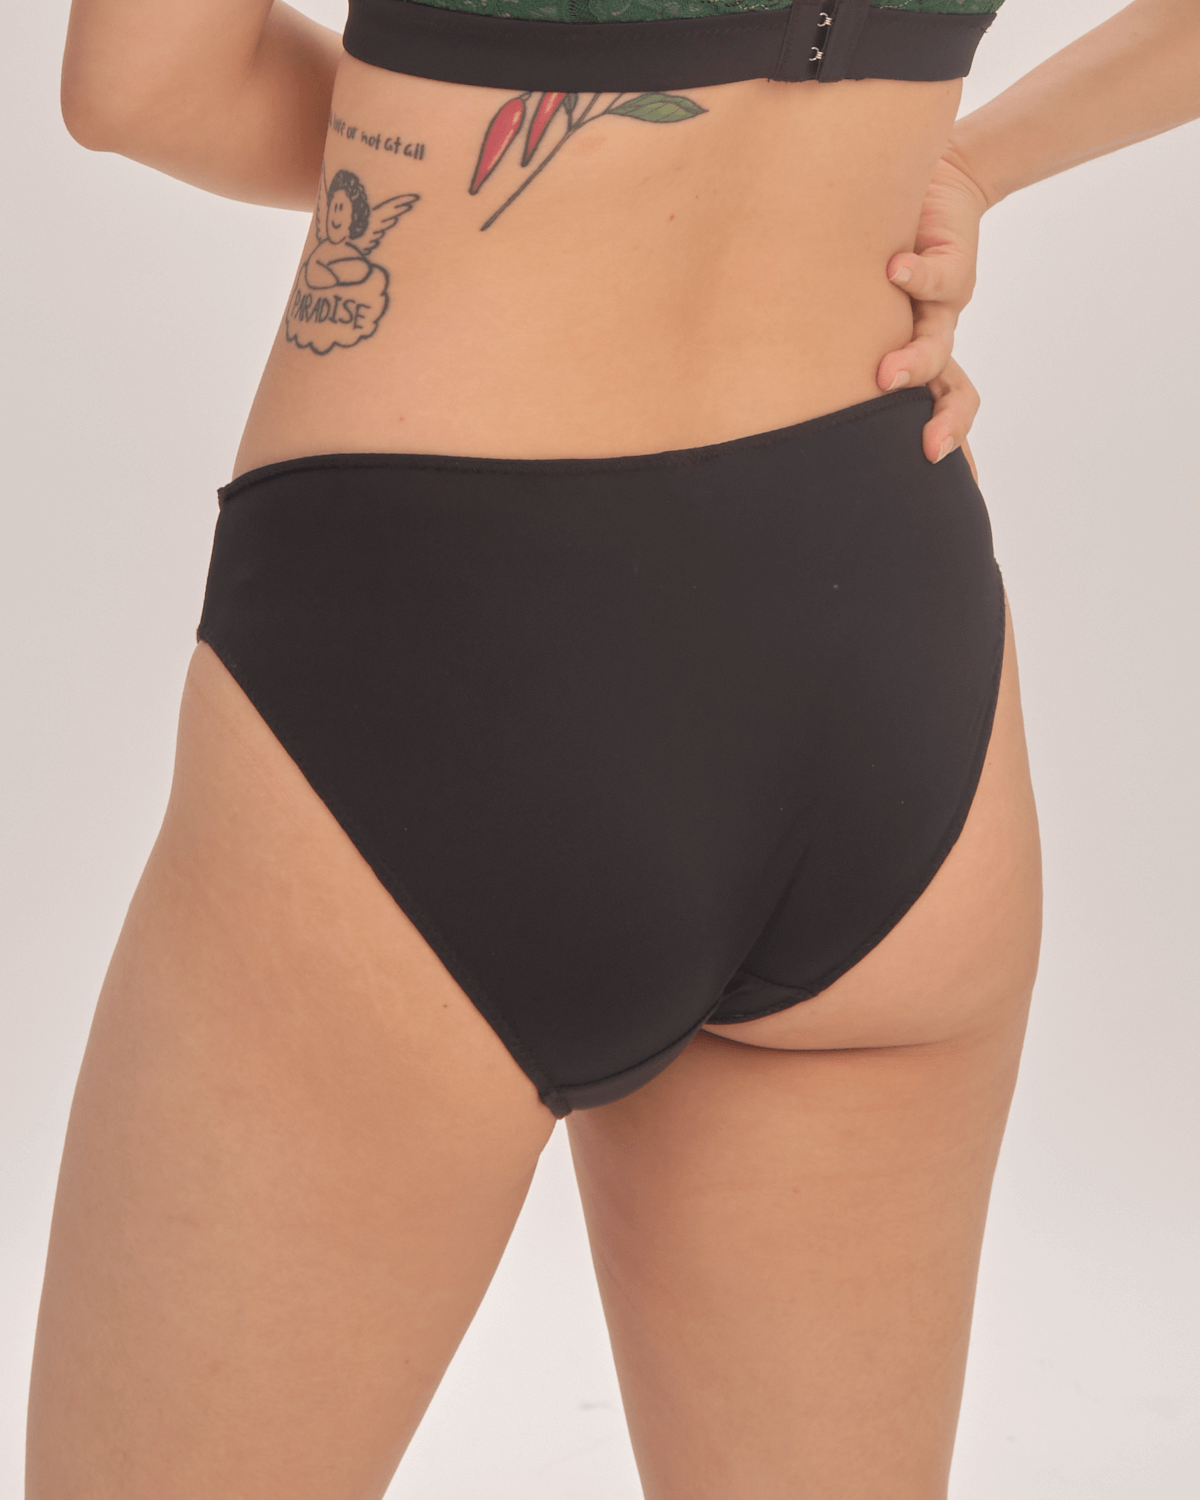 elevated basics panty in #100